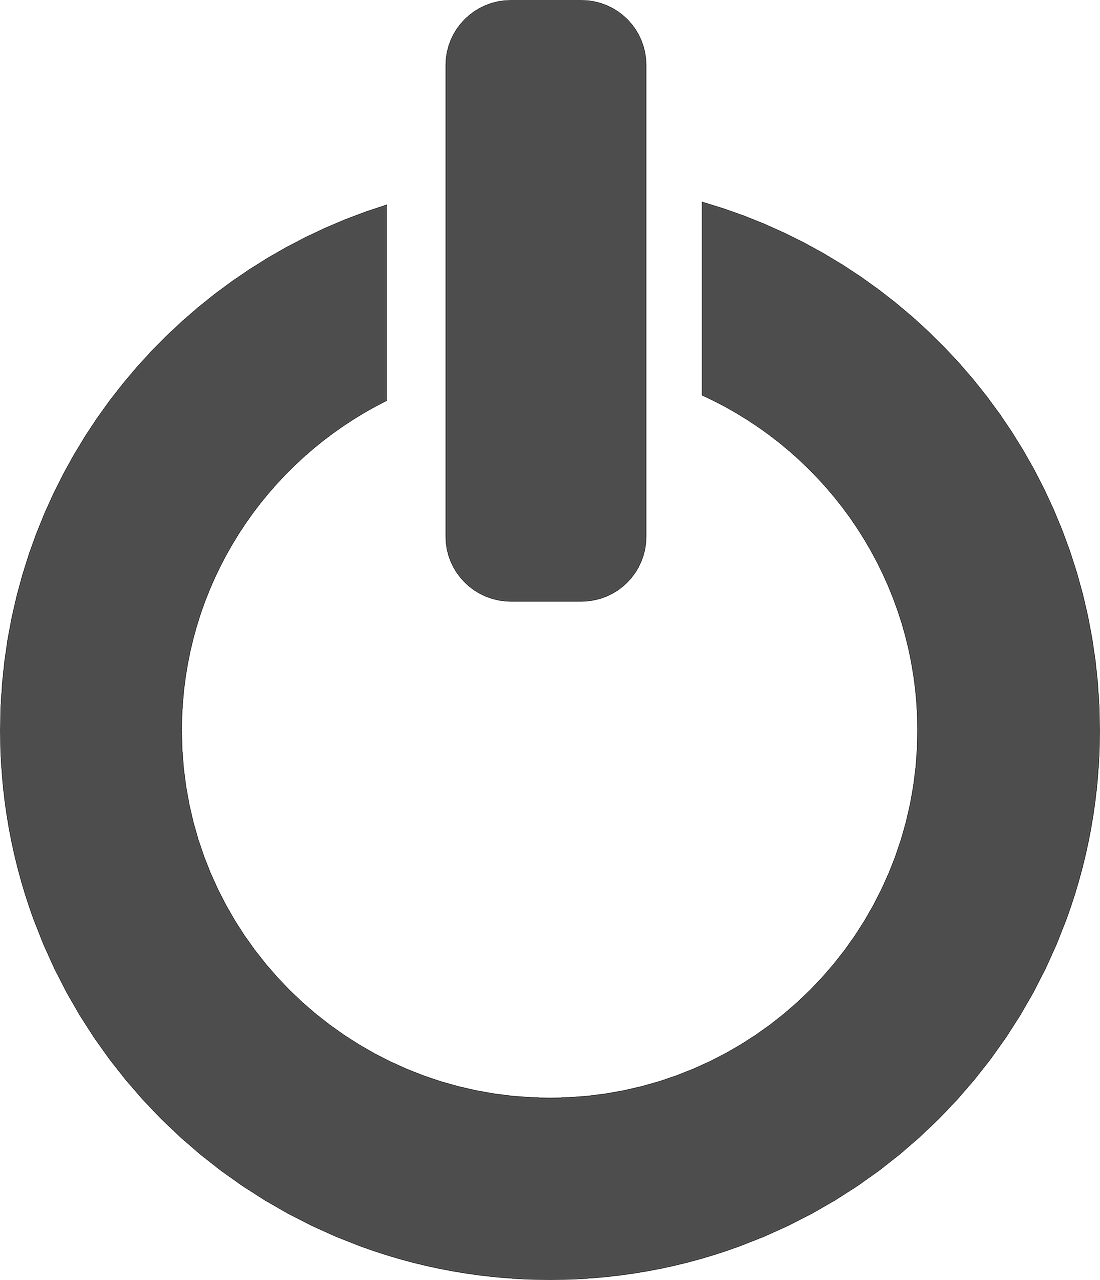 a gray power button on a white background, vector art, pixabay, computer art, minimalistic logo, key is on the center of image, ireland, dark grey